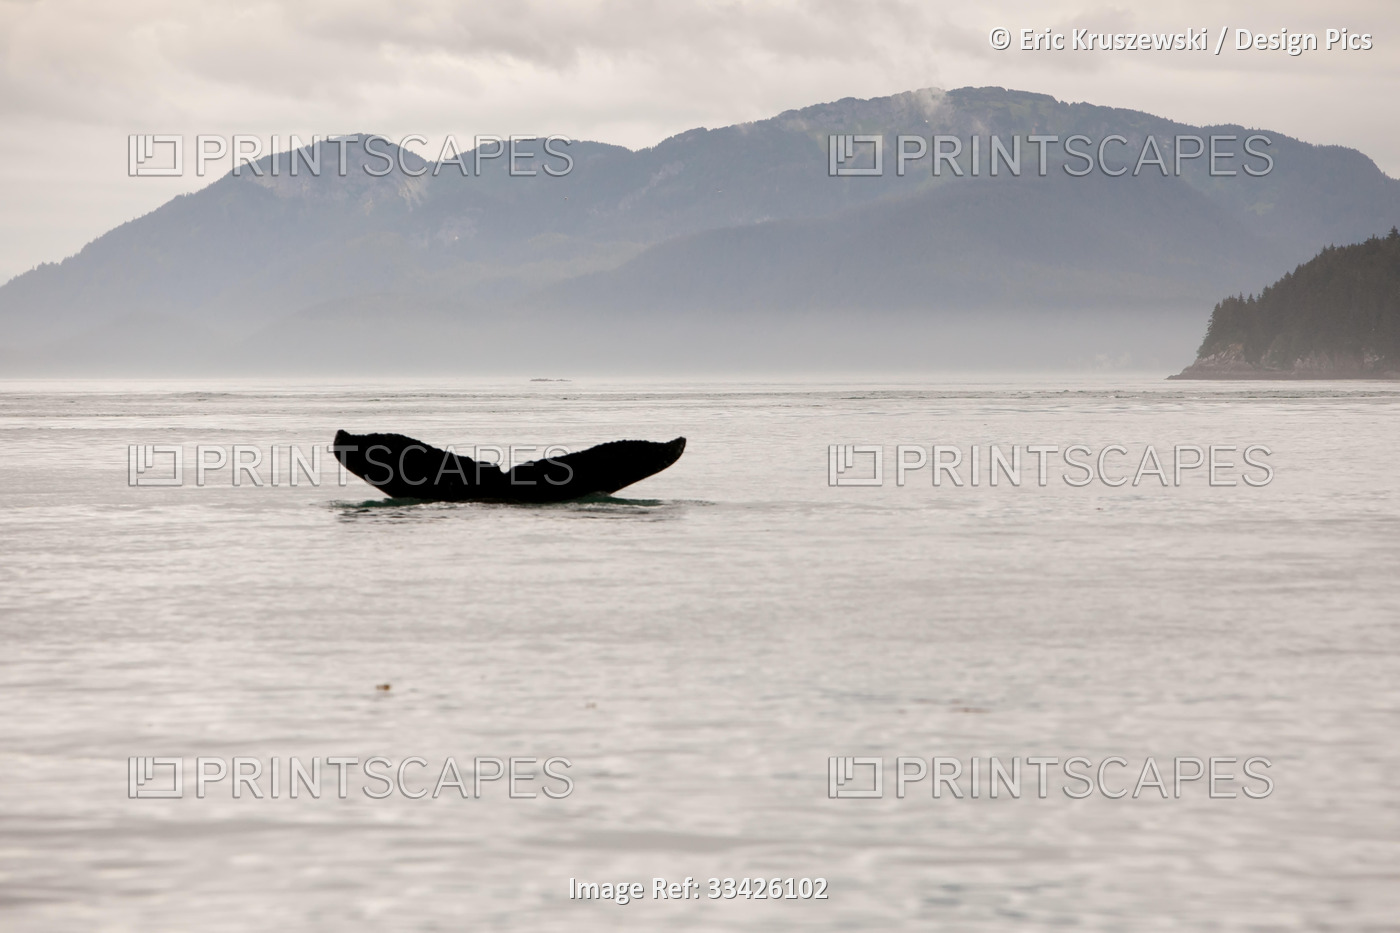 Among mountains, the tail fin of a humpback whale, Megaptera novaeangliae, ...